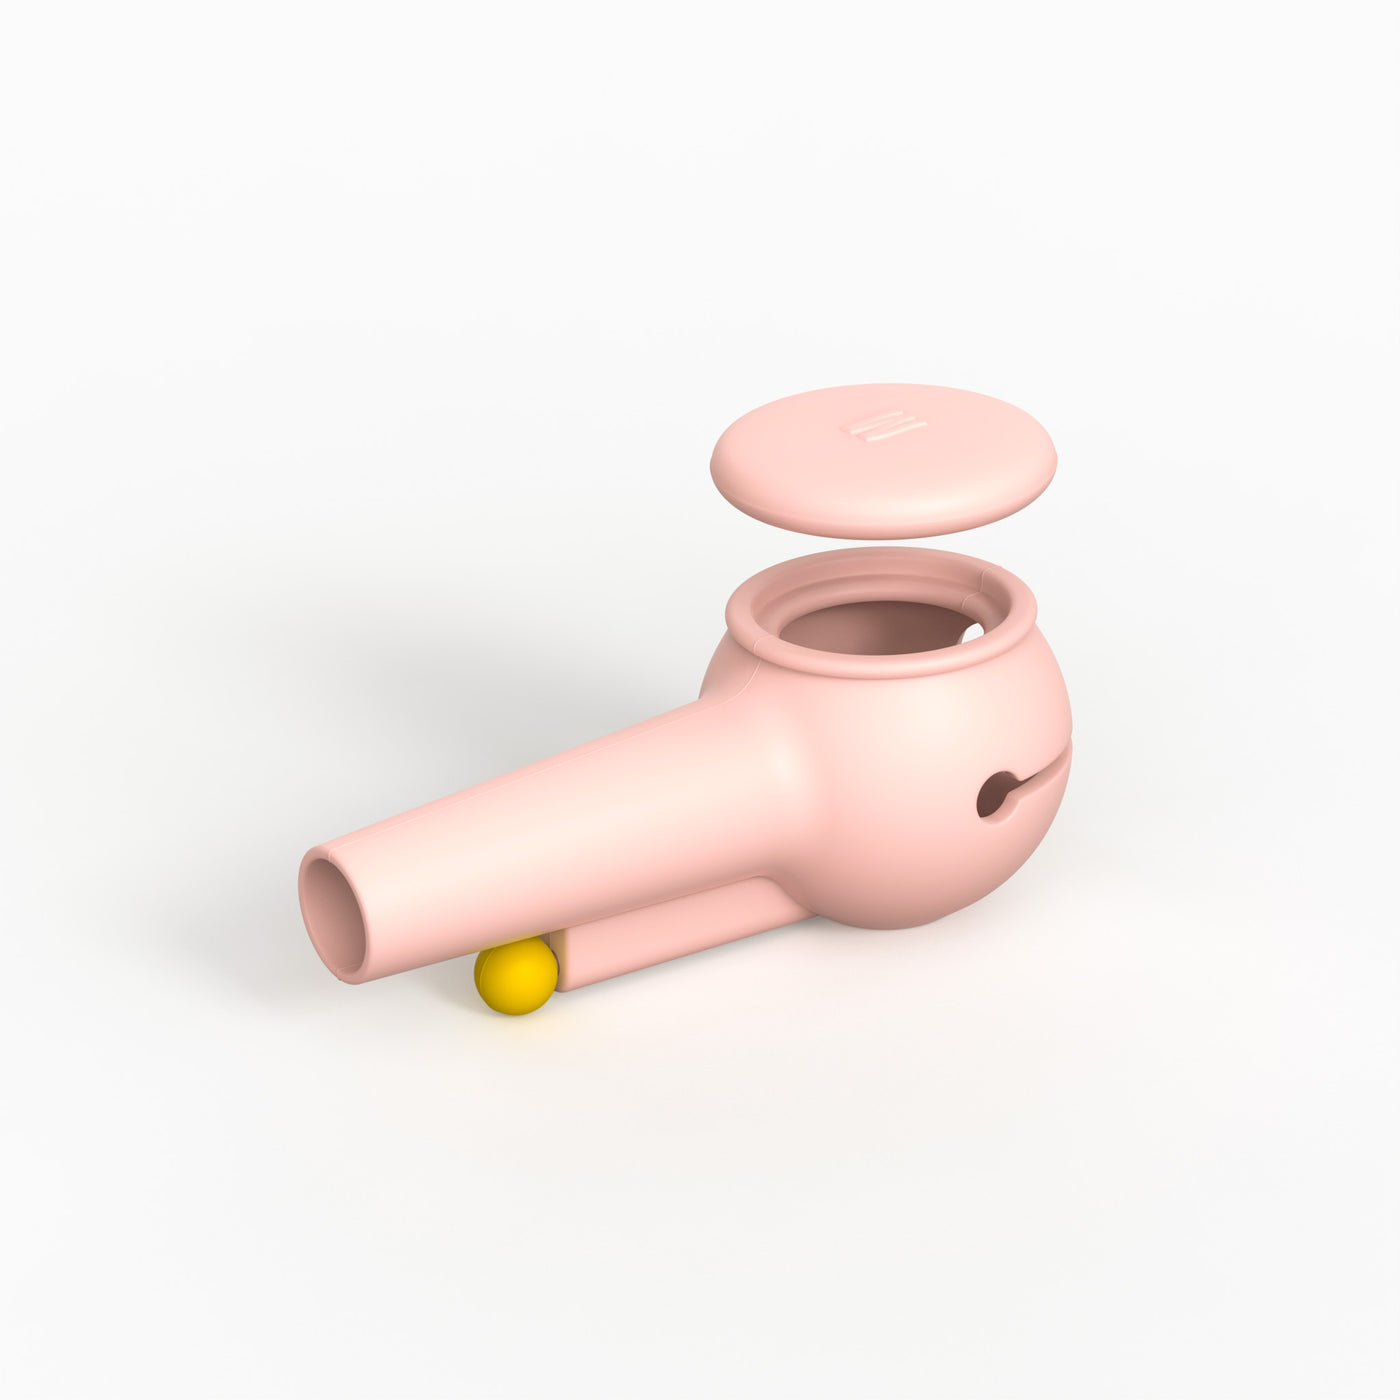 Rendered product photo of baby pink covers with cap uncovered, appearing to float in mid-air.